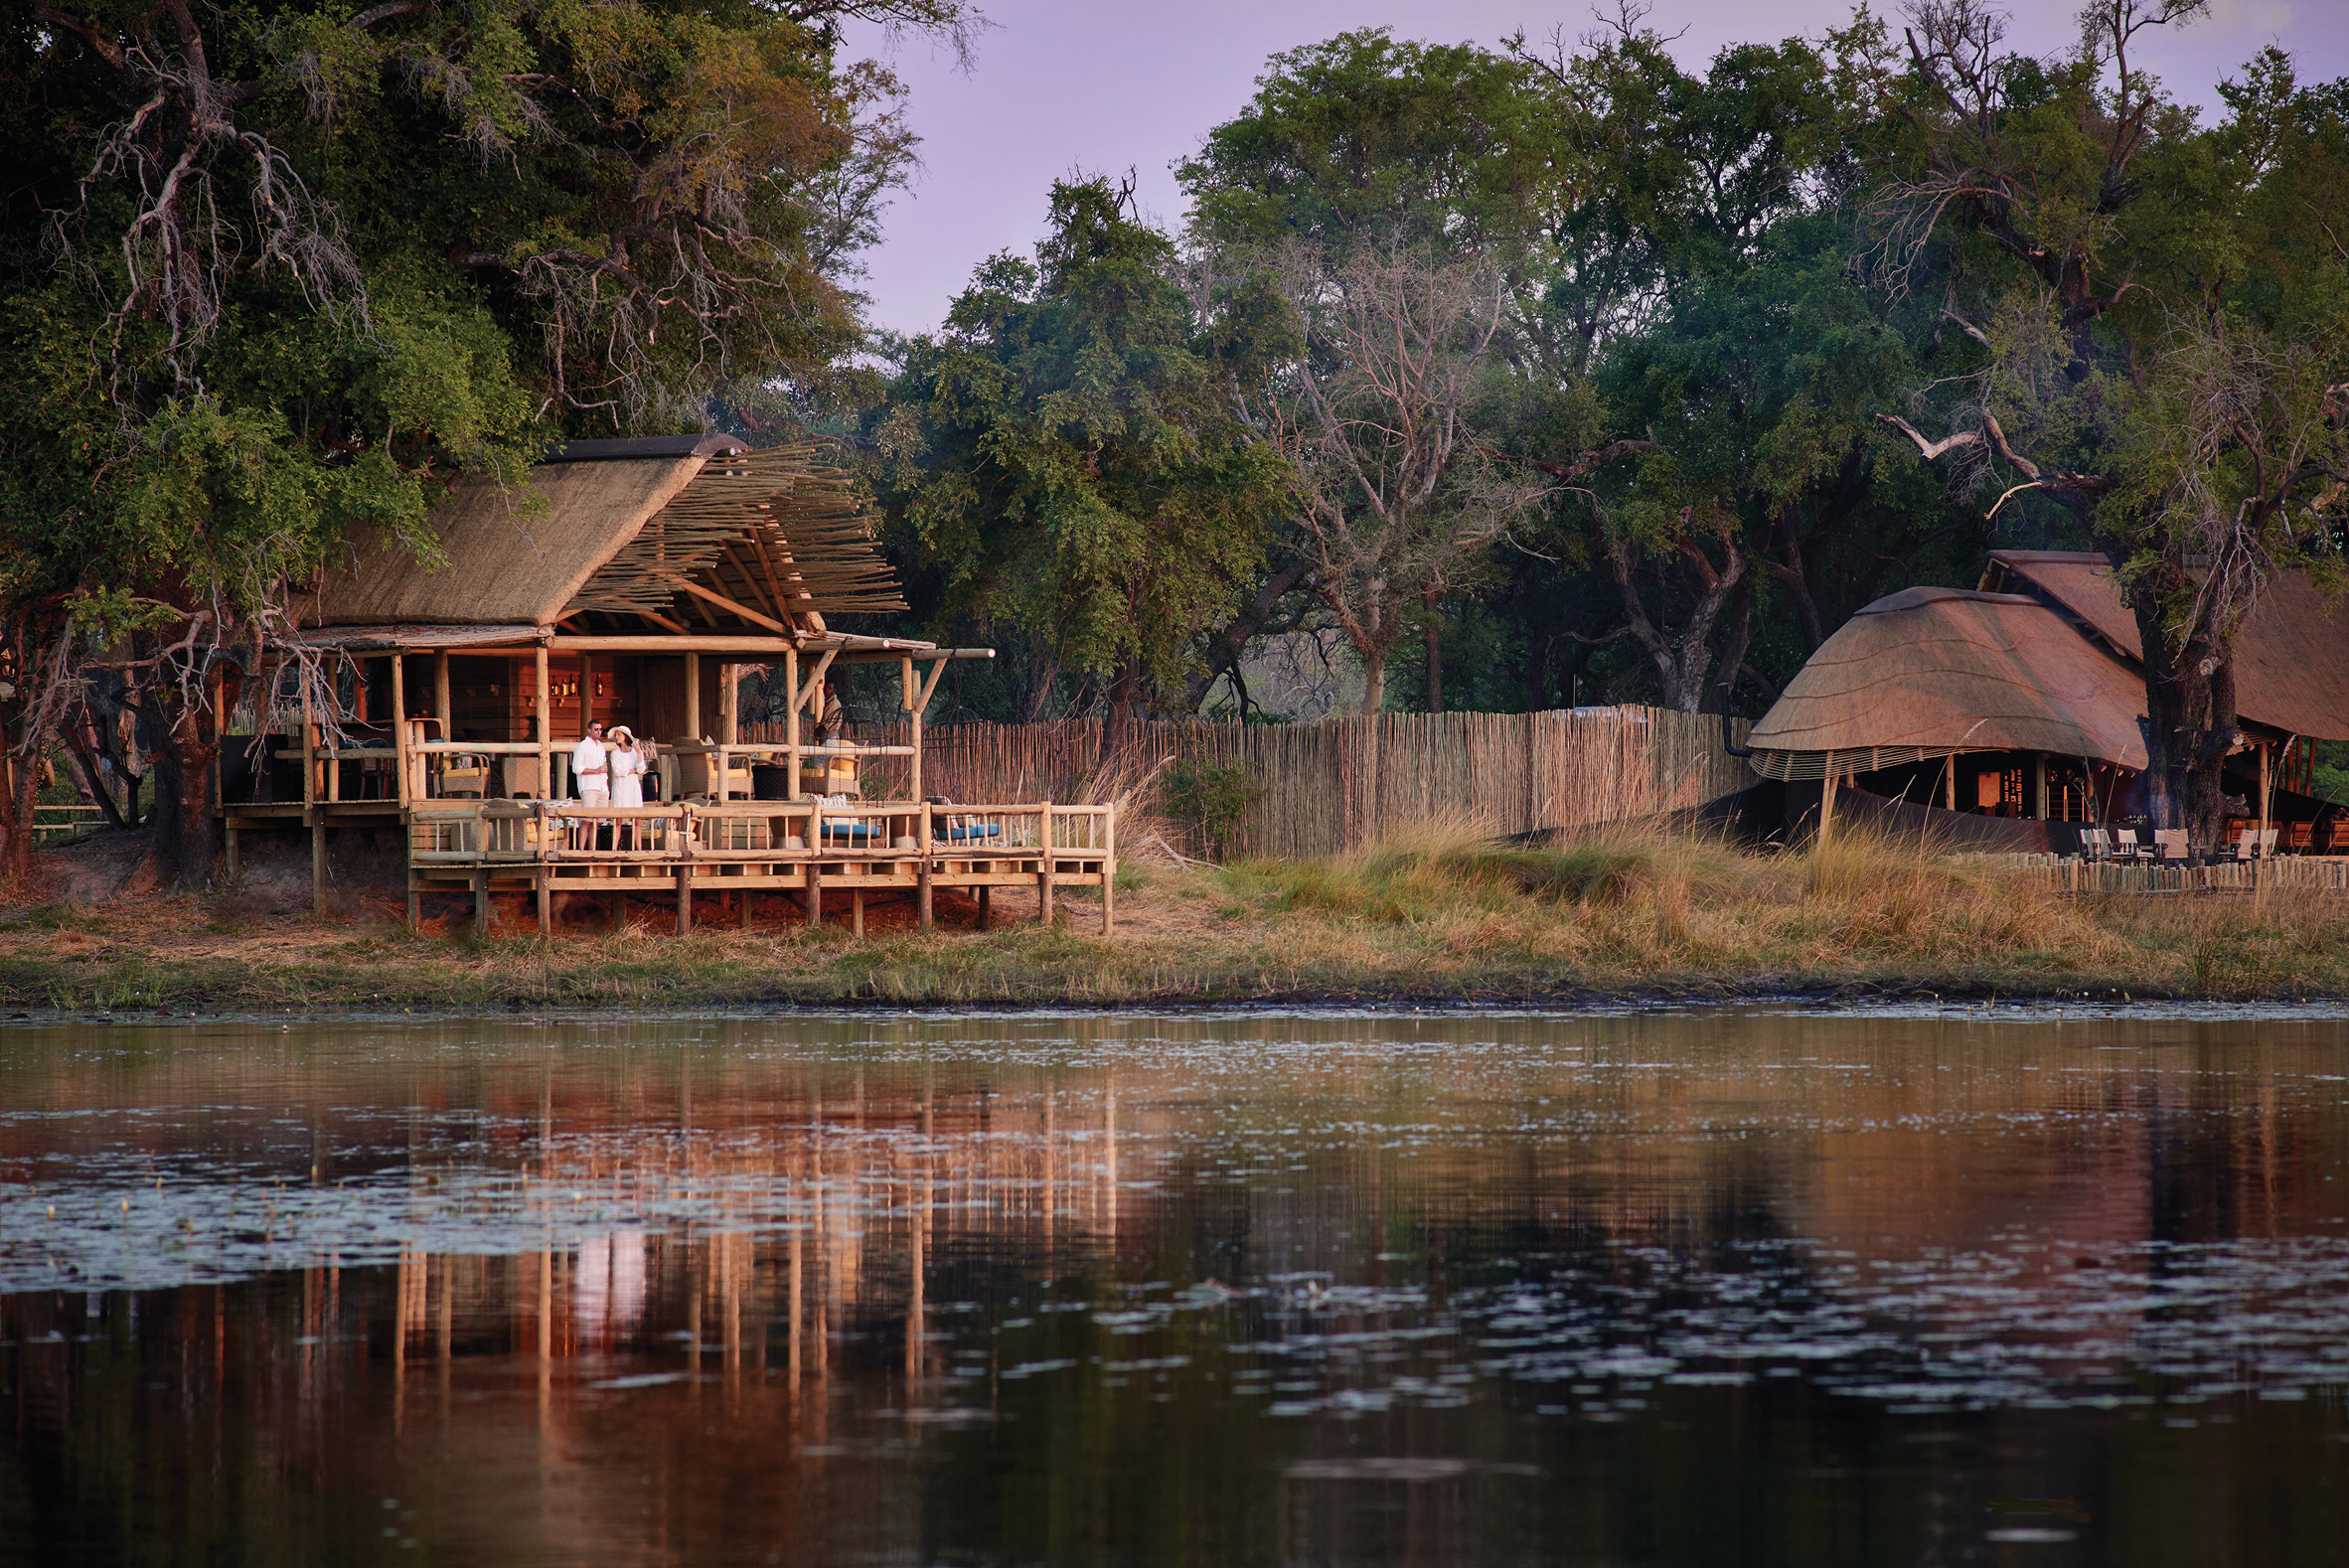 The Belmond Eagle Island Lodge was awarded in the Lodges &amp; Tented Camps category at the AHEAD Global awards, which were held at the Ham Yard Hotel in London